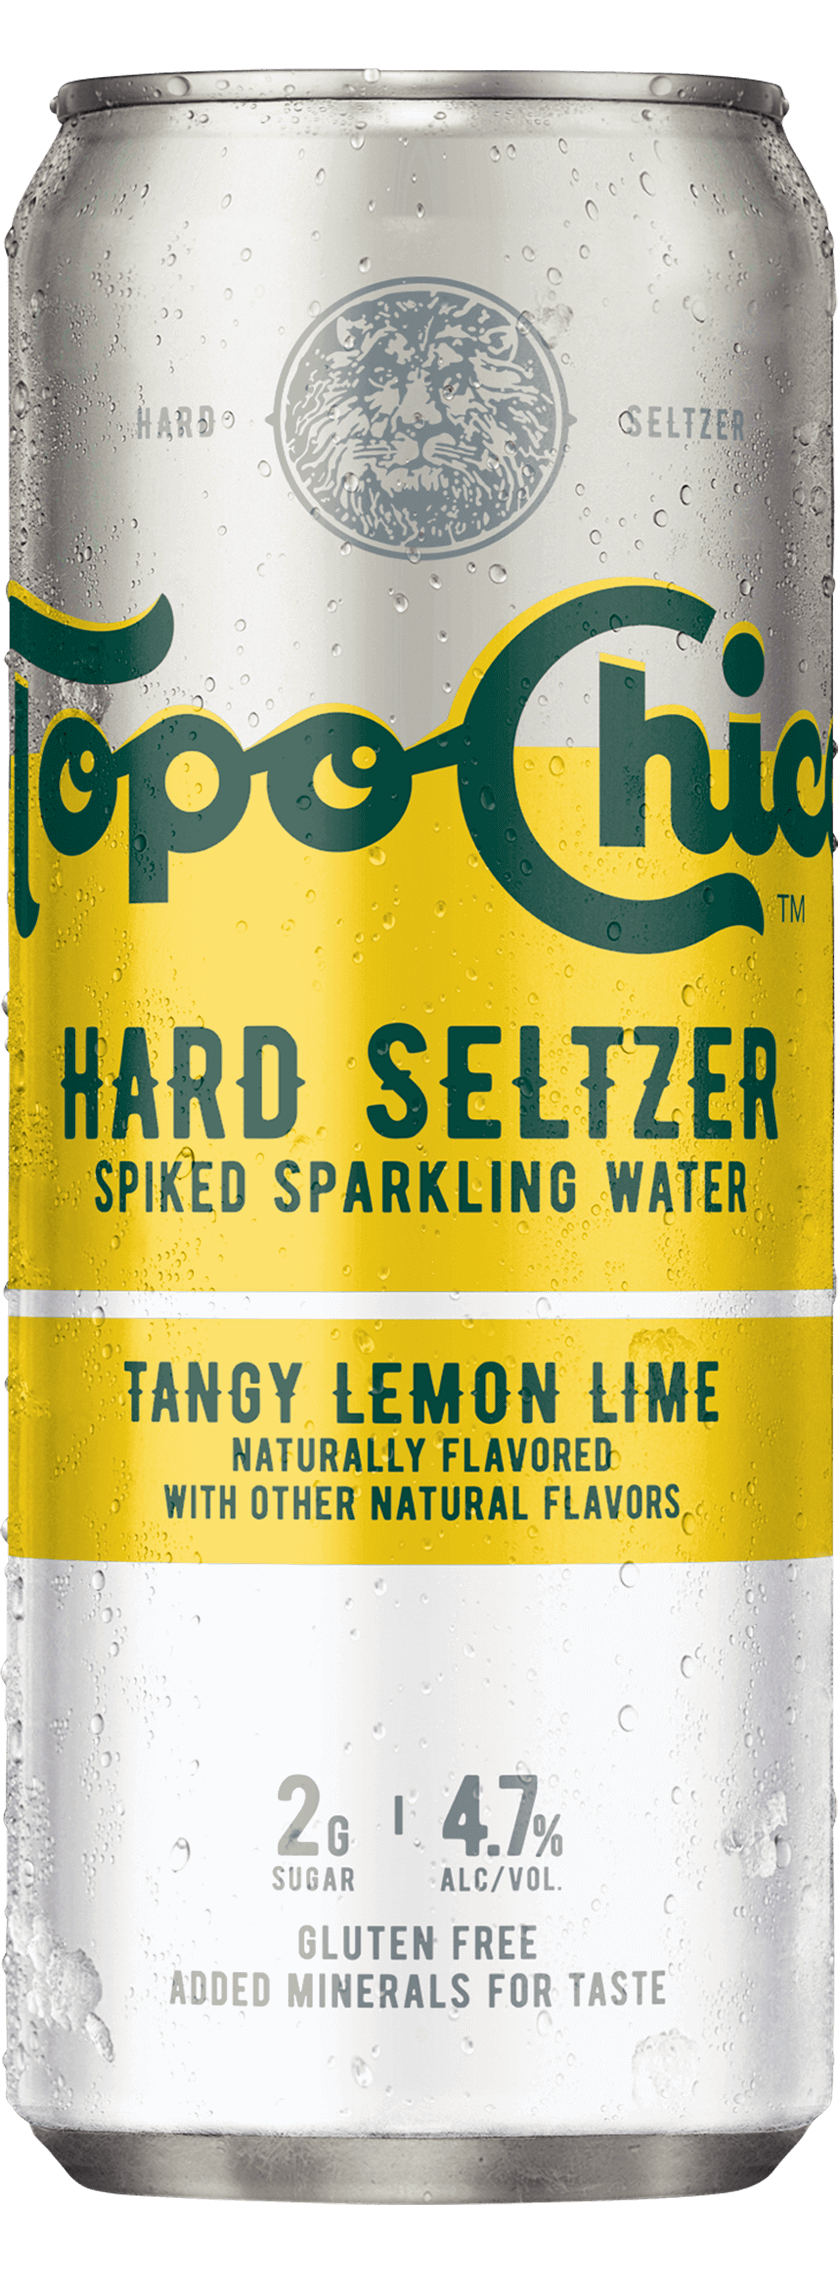 Tangy Lemon Lime can